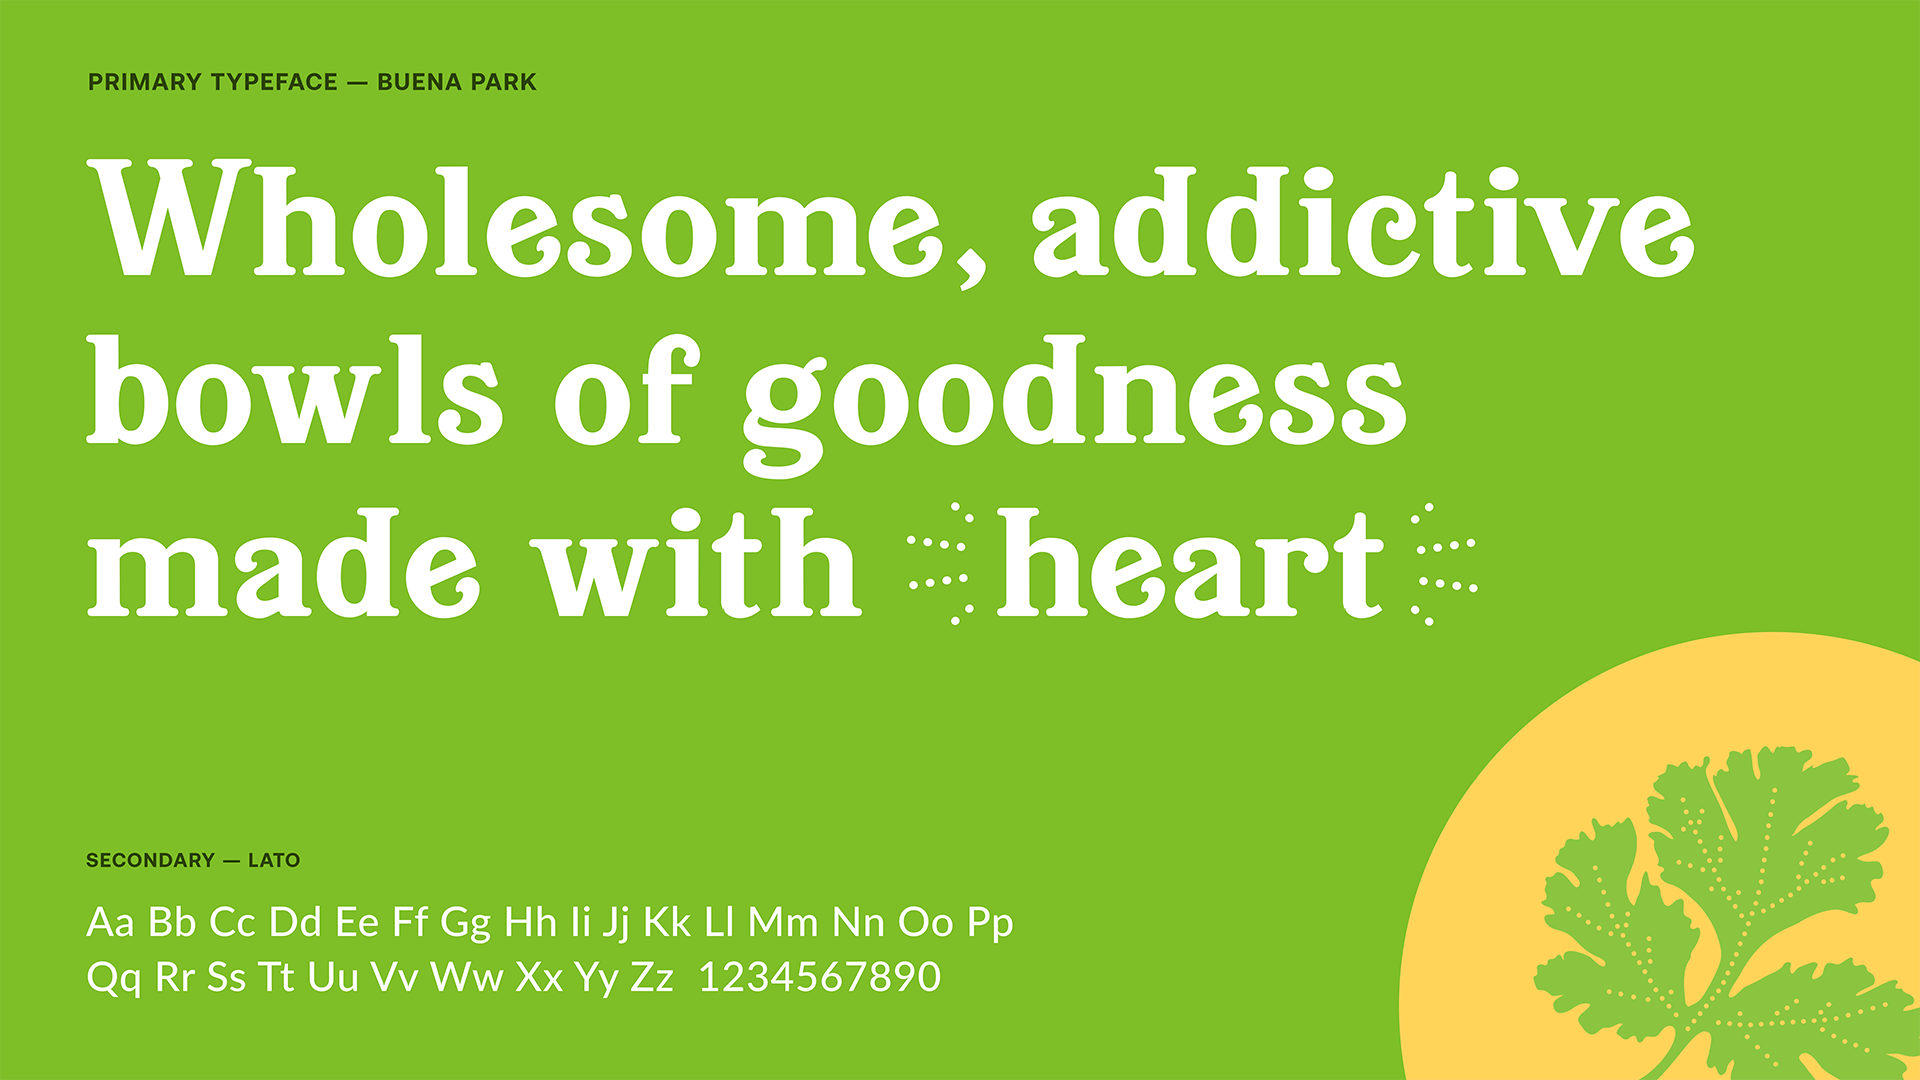 An example of the brand typography using the Whole Bowl brand tagline we crafted, "Wholesome, addictive bowls of goodness made with heart."